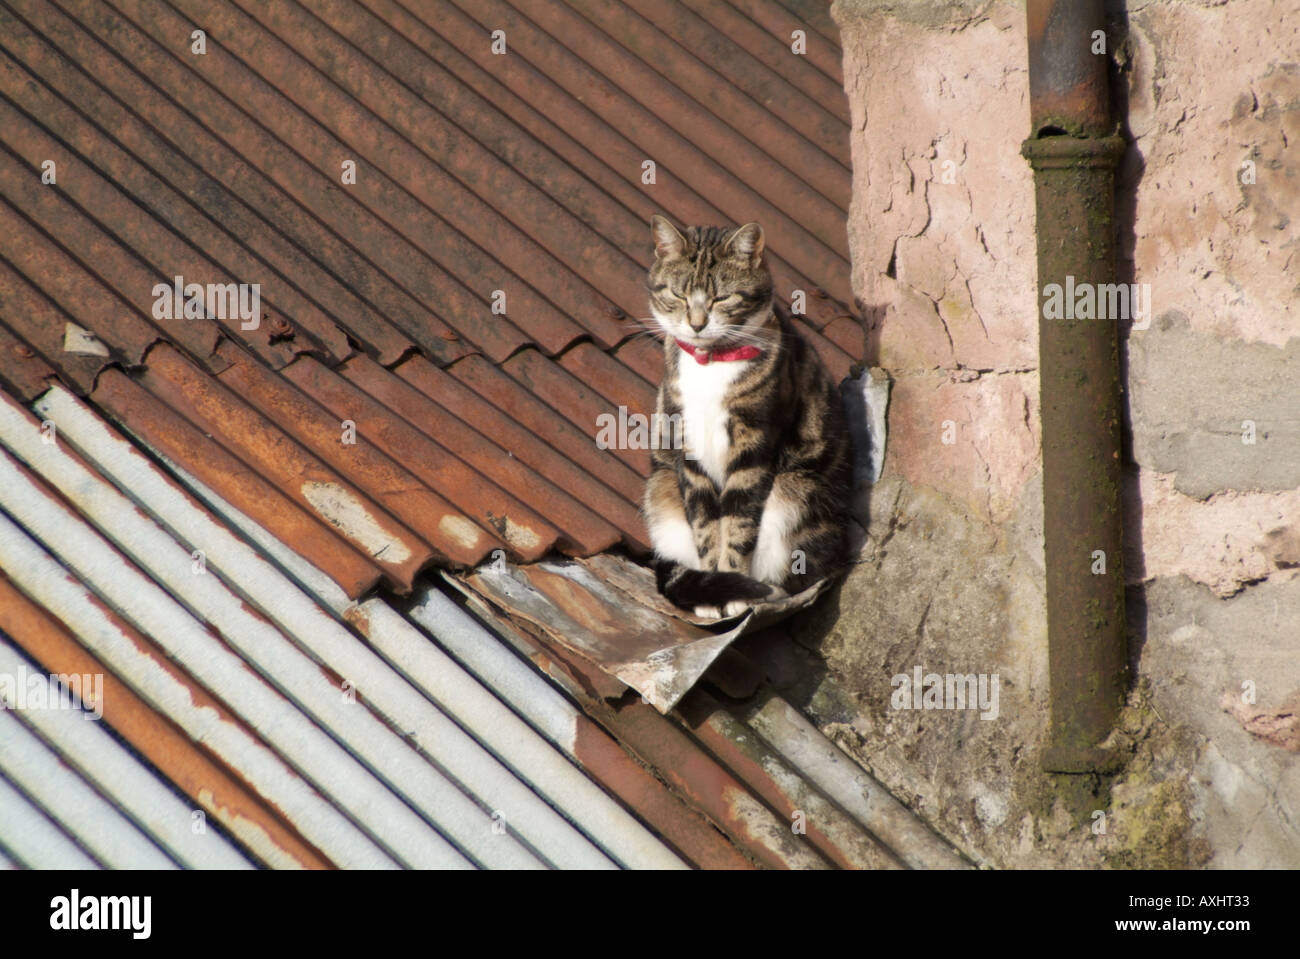 Cat napping in the sunshine on a corrugated iron roof Stock Photo